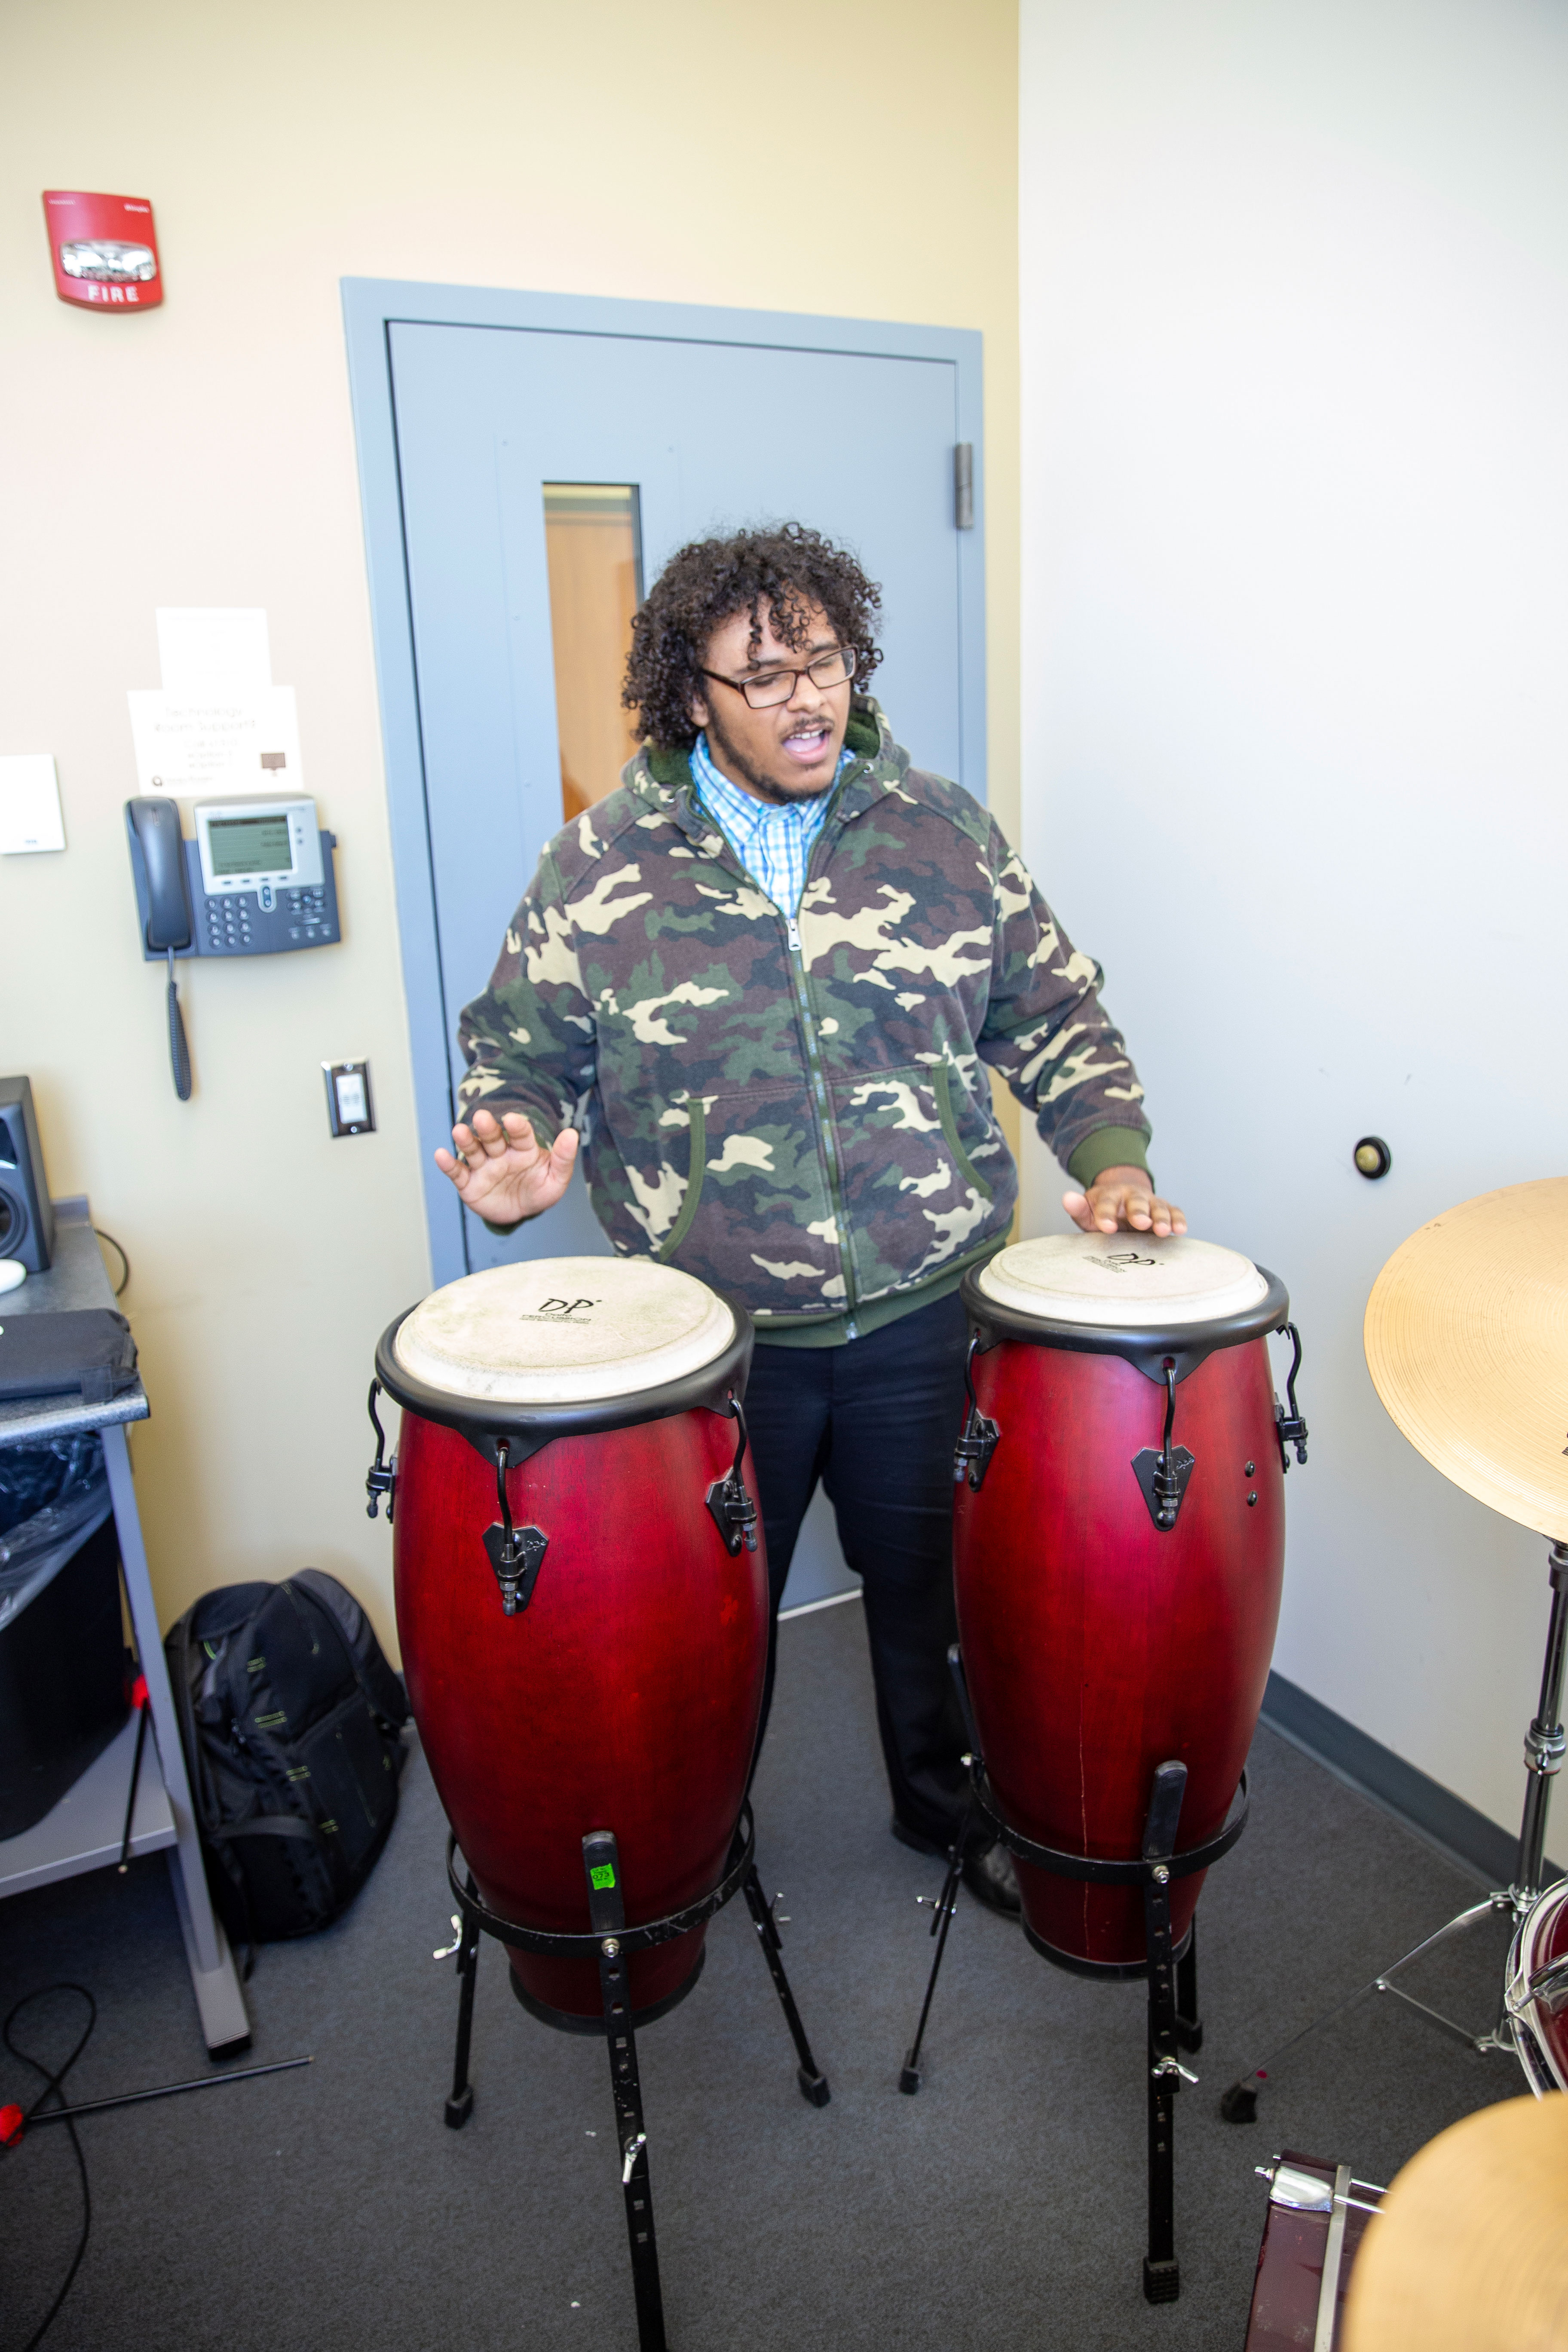 Student playing congas